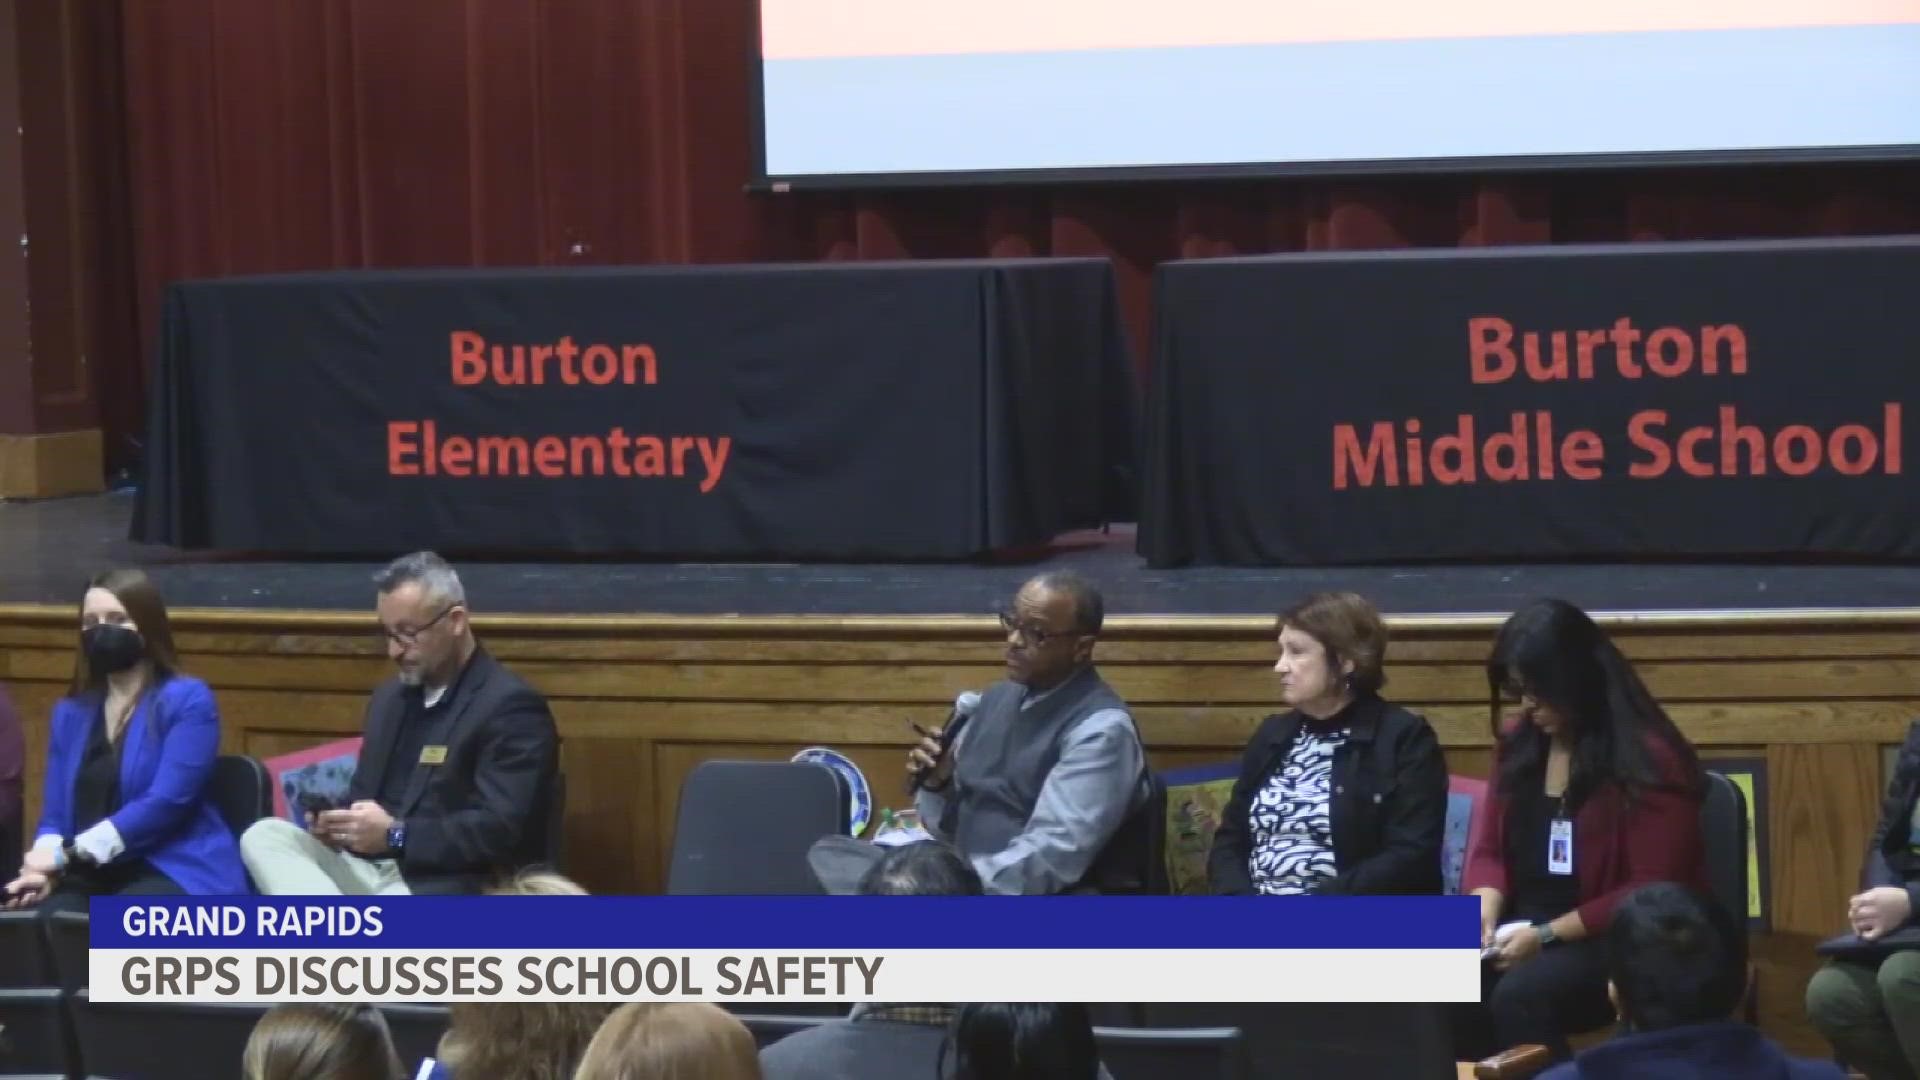 Two incidents involving guns at Burton Middle School in Grand Rapids are prompting discussions between the district, parents and staff on how to keep guns out.